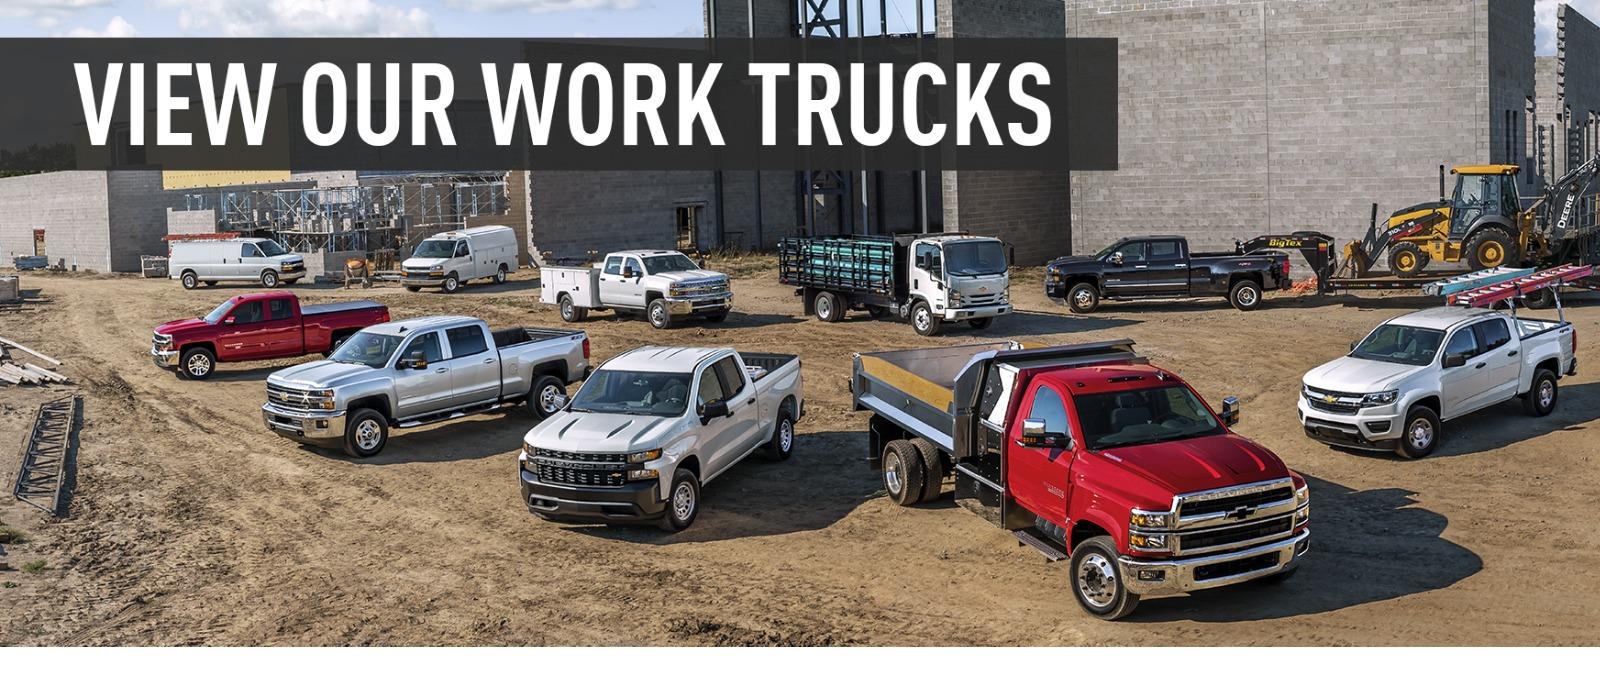 View Our Work Trucks